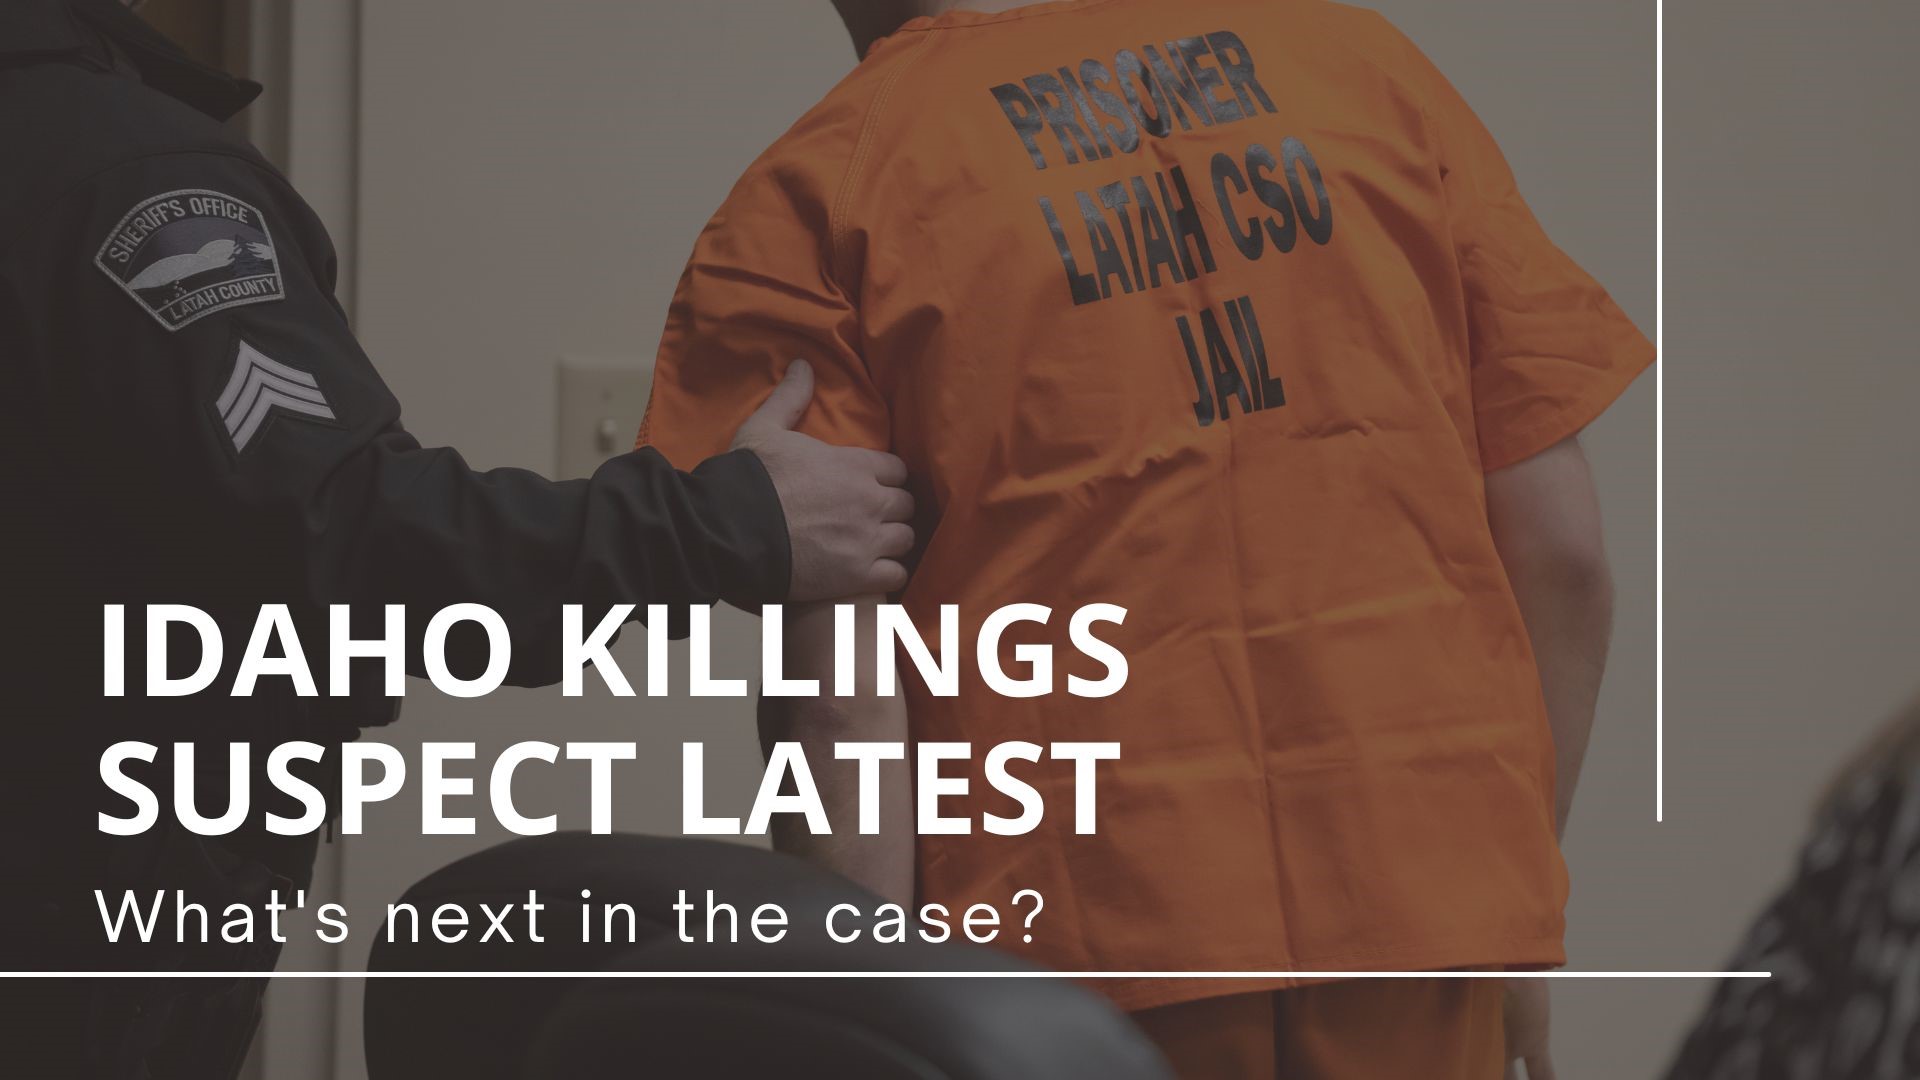 The man suspected of killing four University of Idaho students now has a preliminary hearing date for his case. Plus more on the timeline of events and evidence.